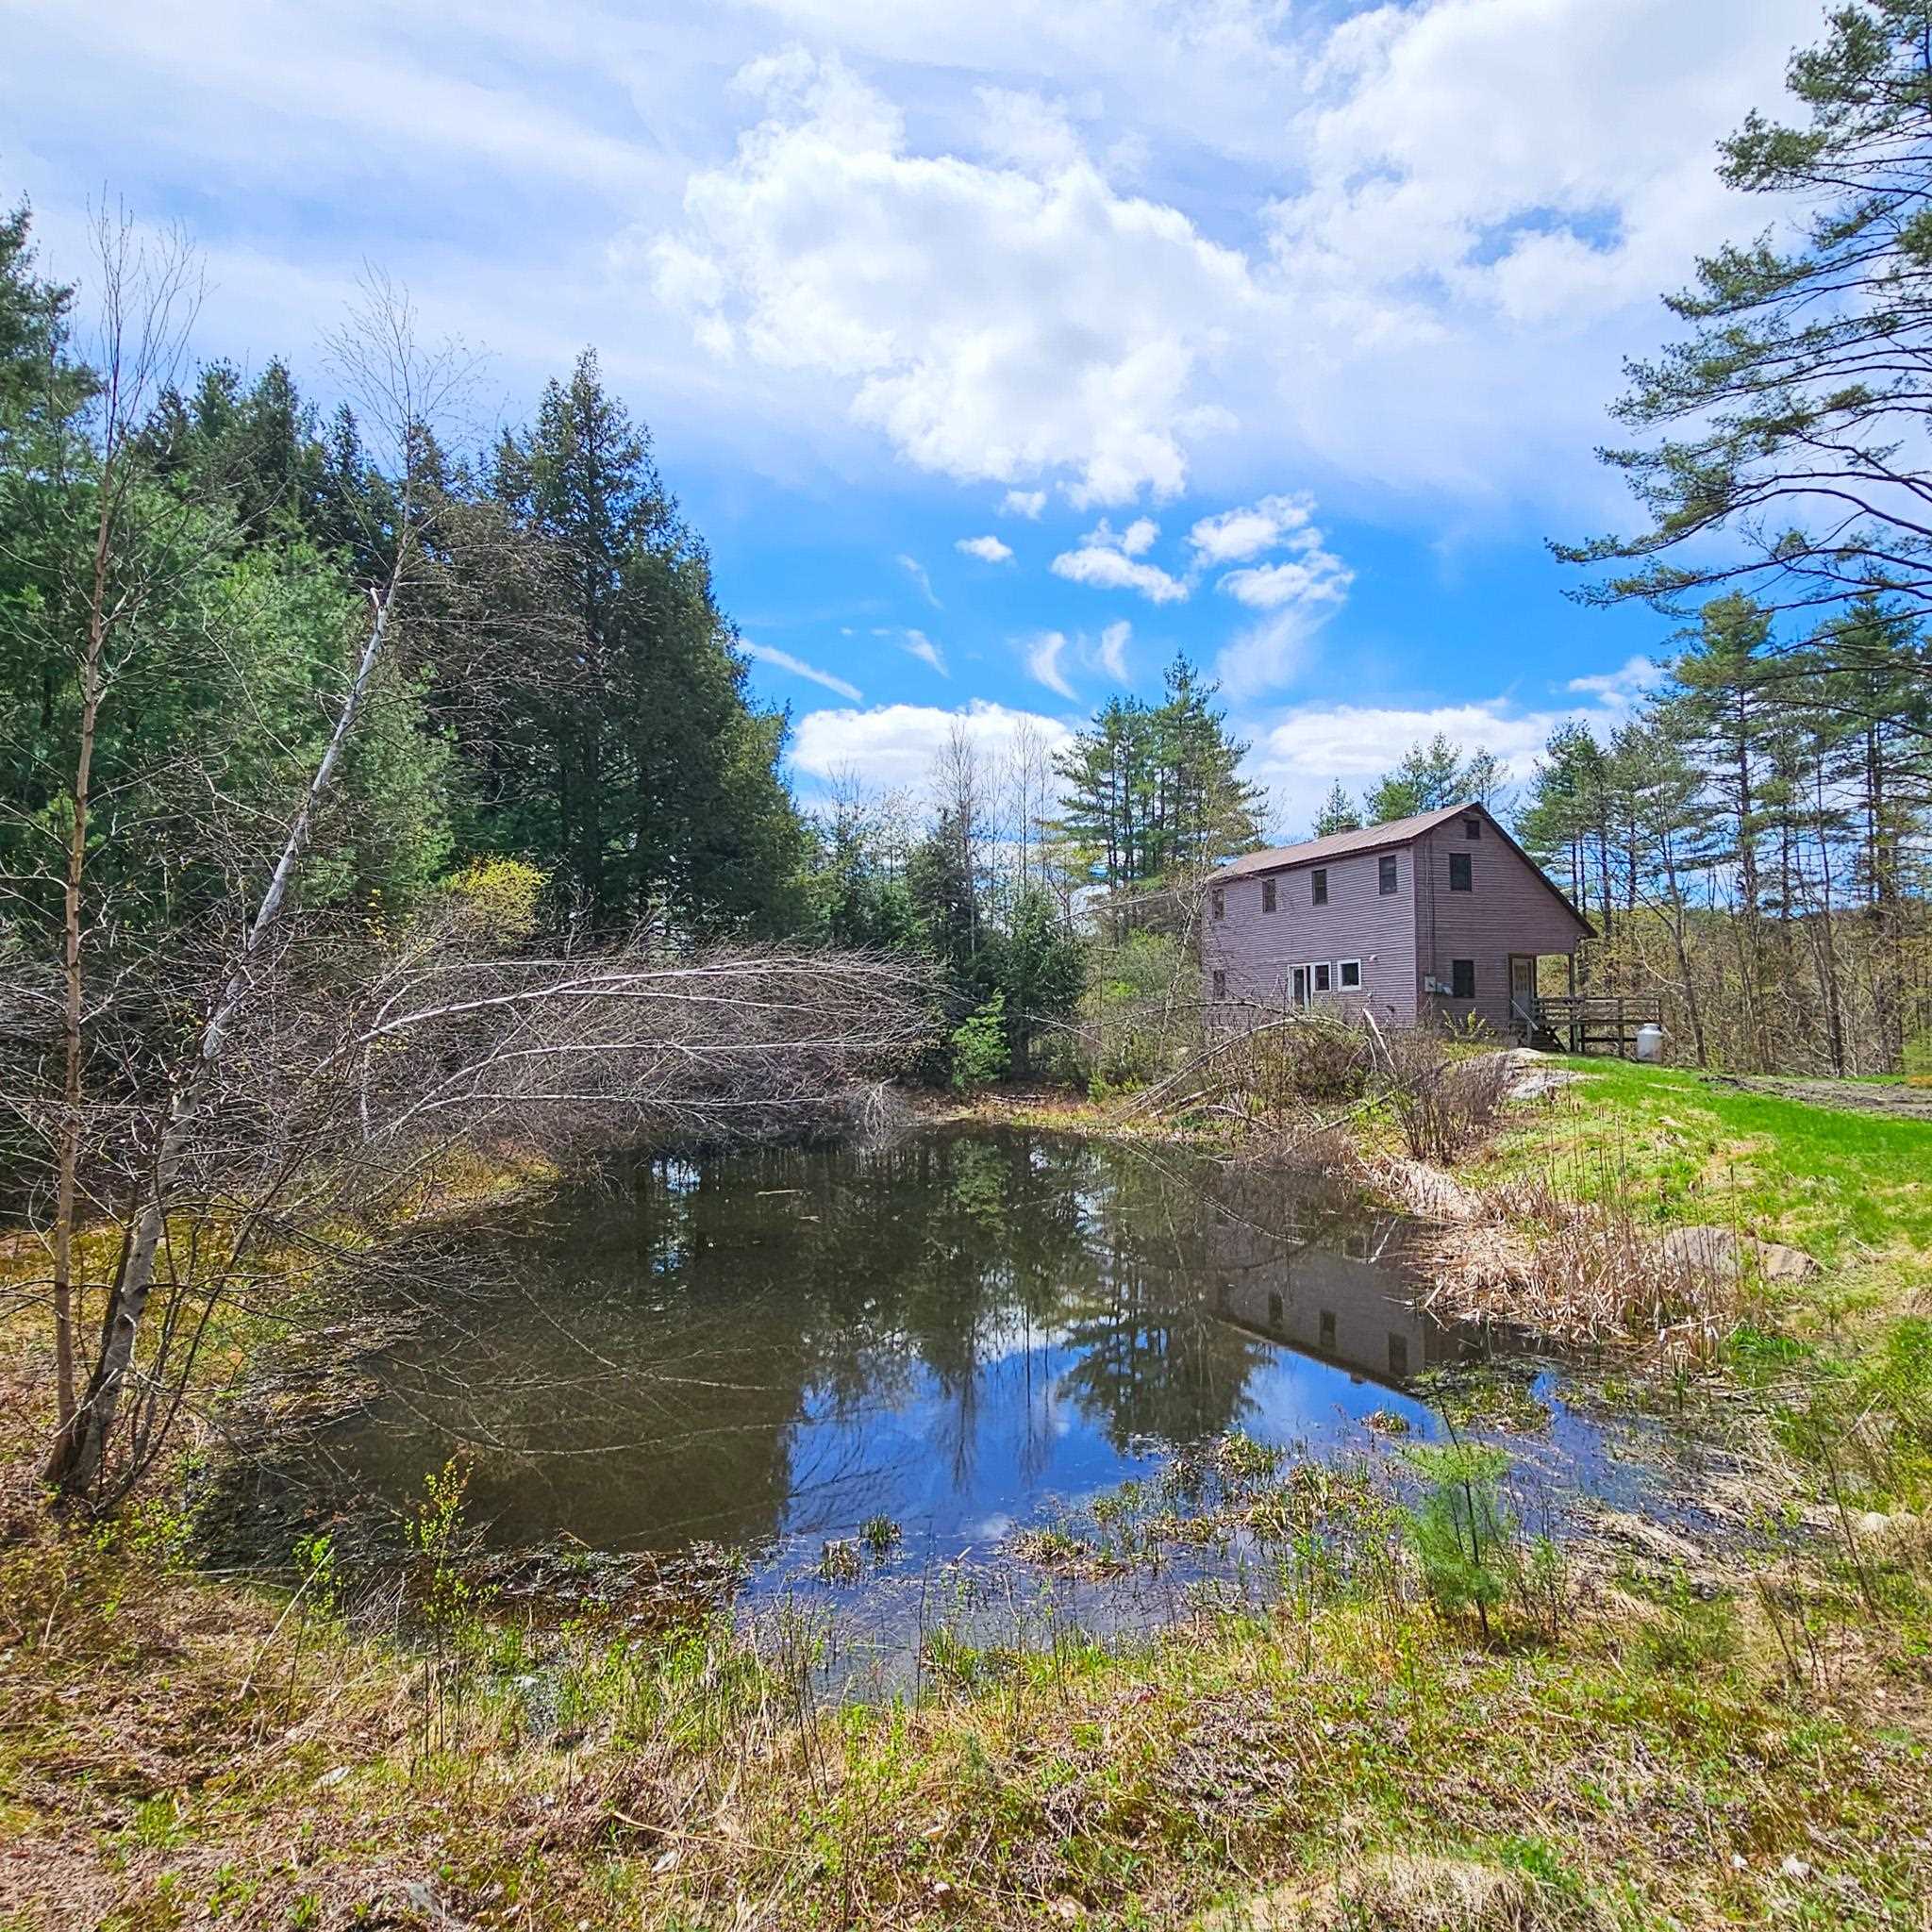 VILLAGE OF SAXTONS RIVER IN TOWN OF GRAFTON VT Homes for sale